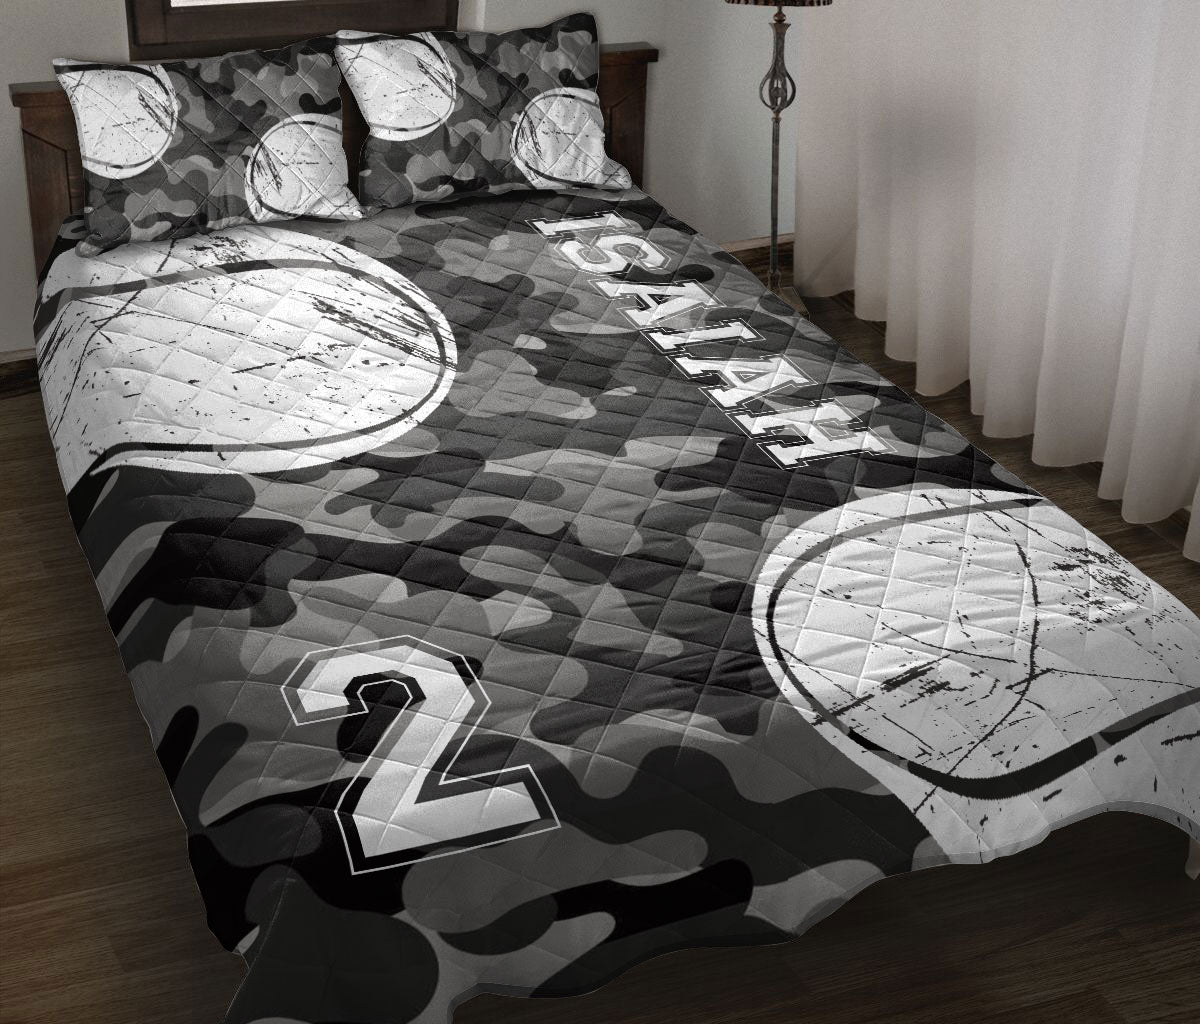 Ohaprints-Quilt-Bed-Set-Pillowcase-Tennis-Ball-Black-Camo-Pattern-Sports-Gift-Custom-Personalized-Name-Number-Blanket-Bedspread-Bedding-1366-Throw (55'' x 60'')